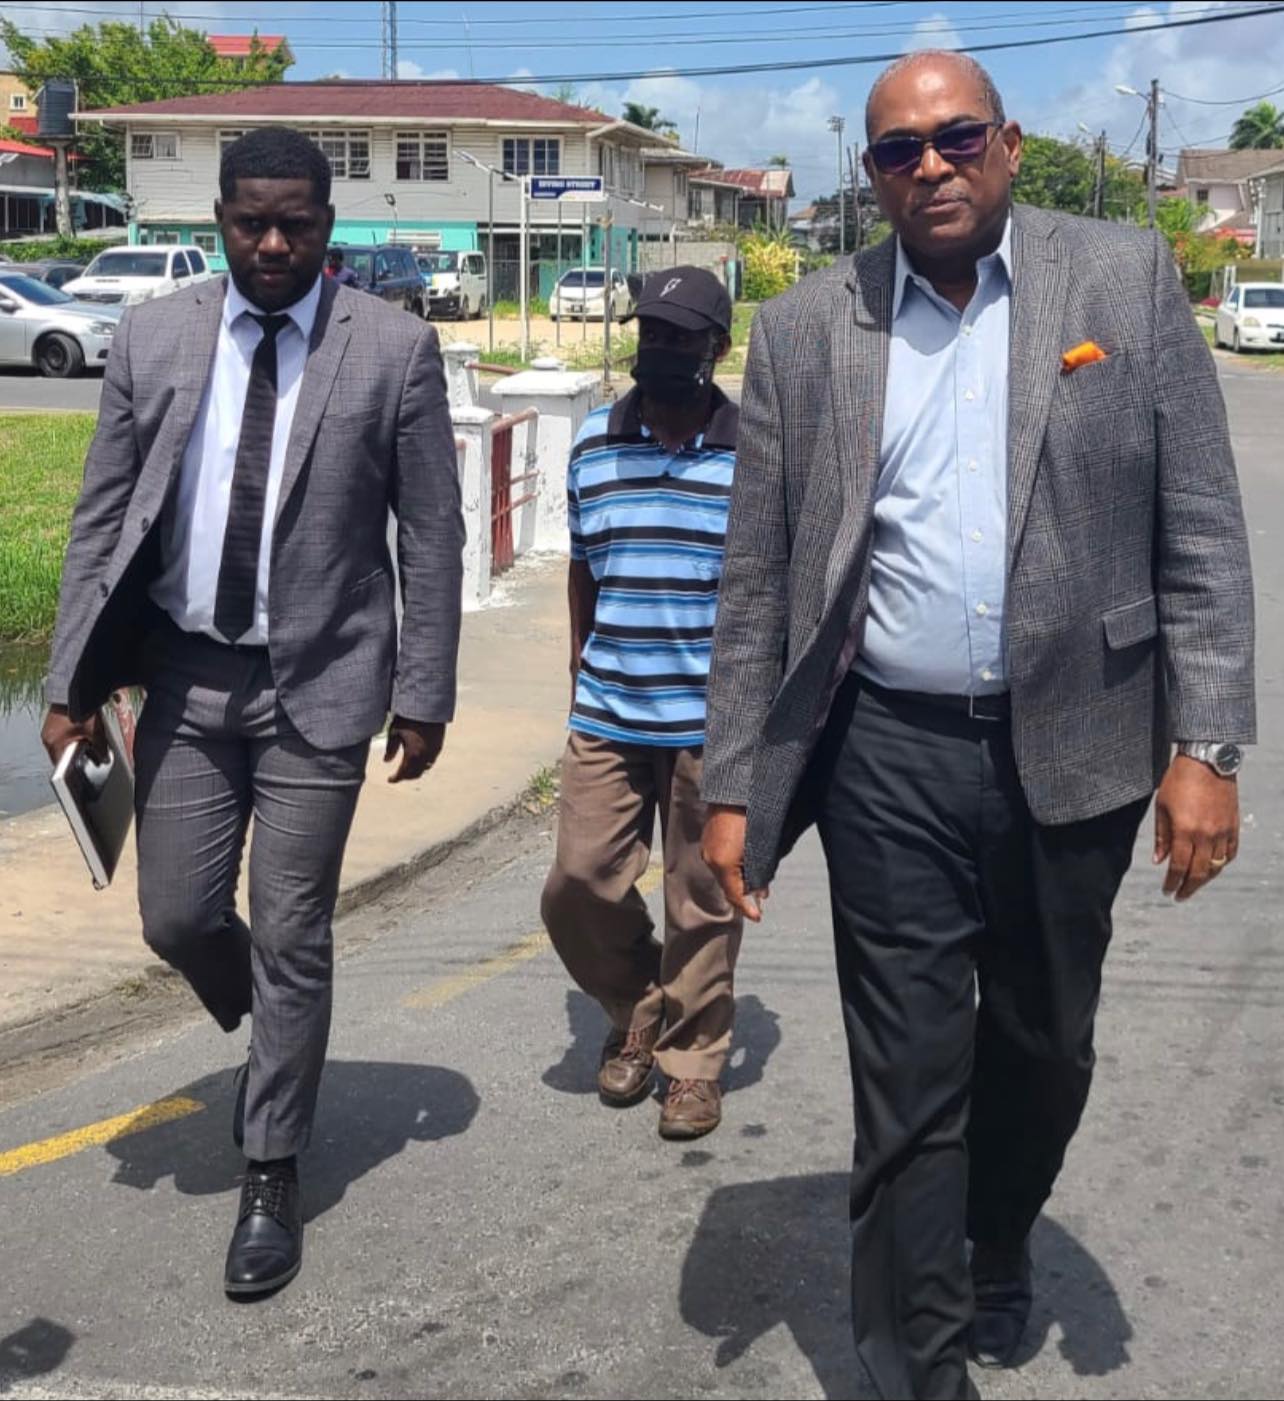 Executive member of the Working People’s Alliance (WPA) Mutope Tacuma Ogunseye turned himself into police investigators on Friday in the presence of his lawyers, Nigel Hughes and Darren Wade. (NewsSource photo)